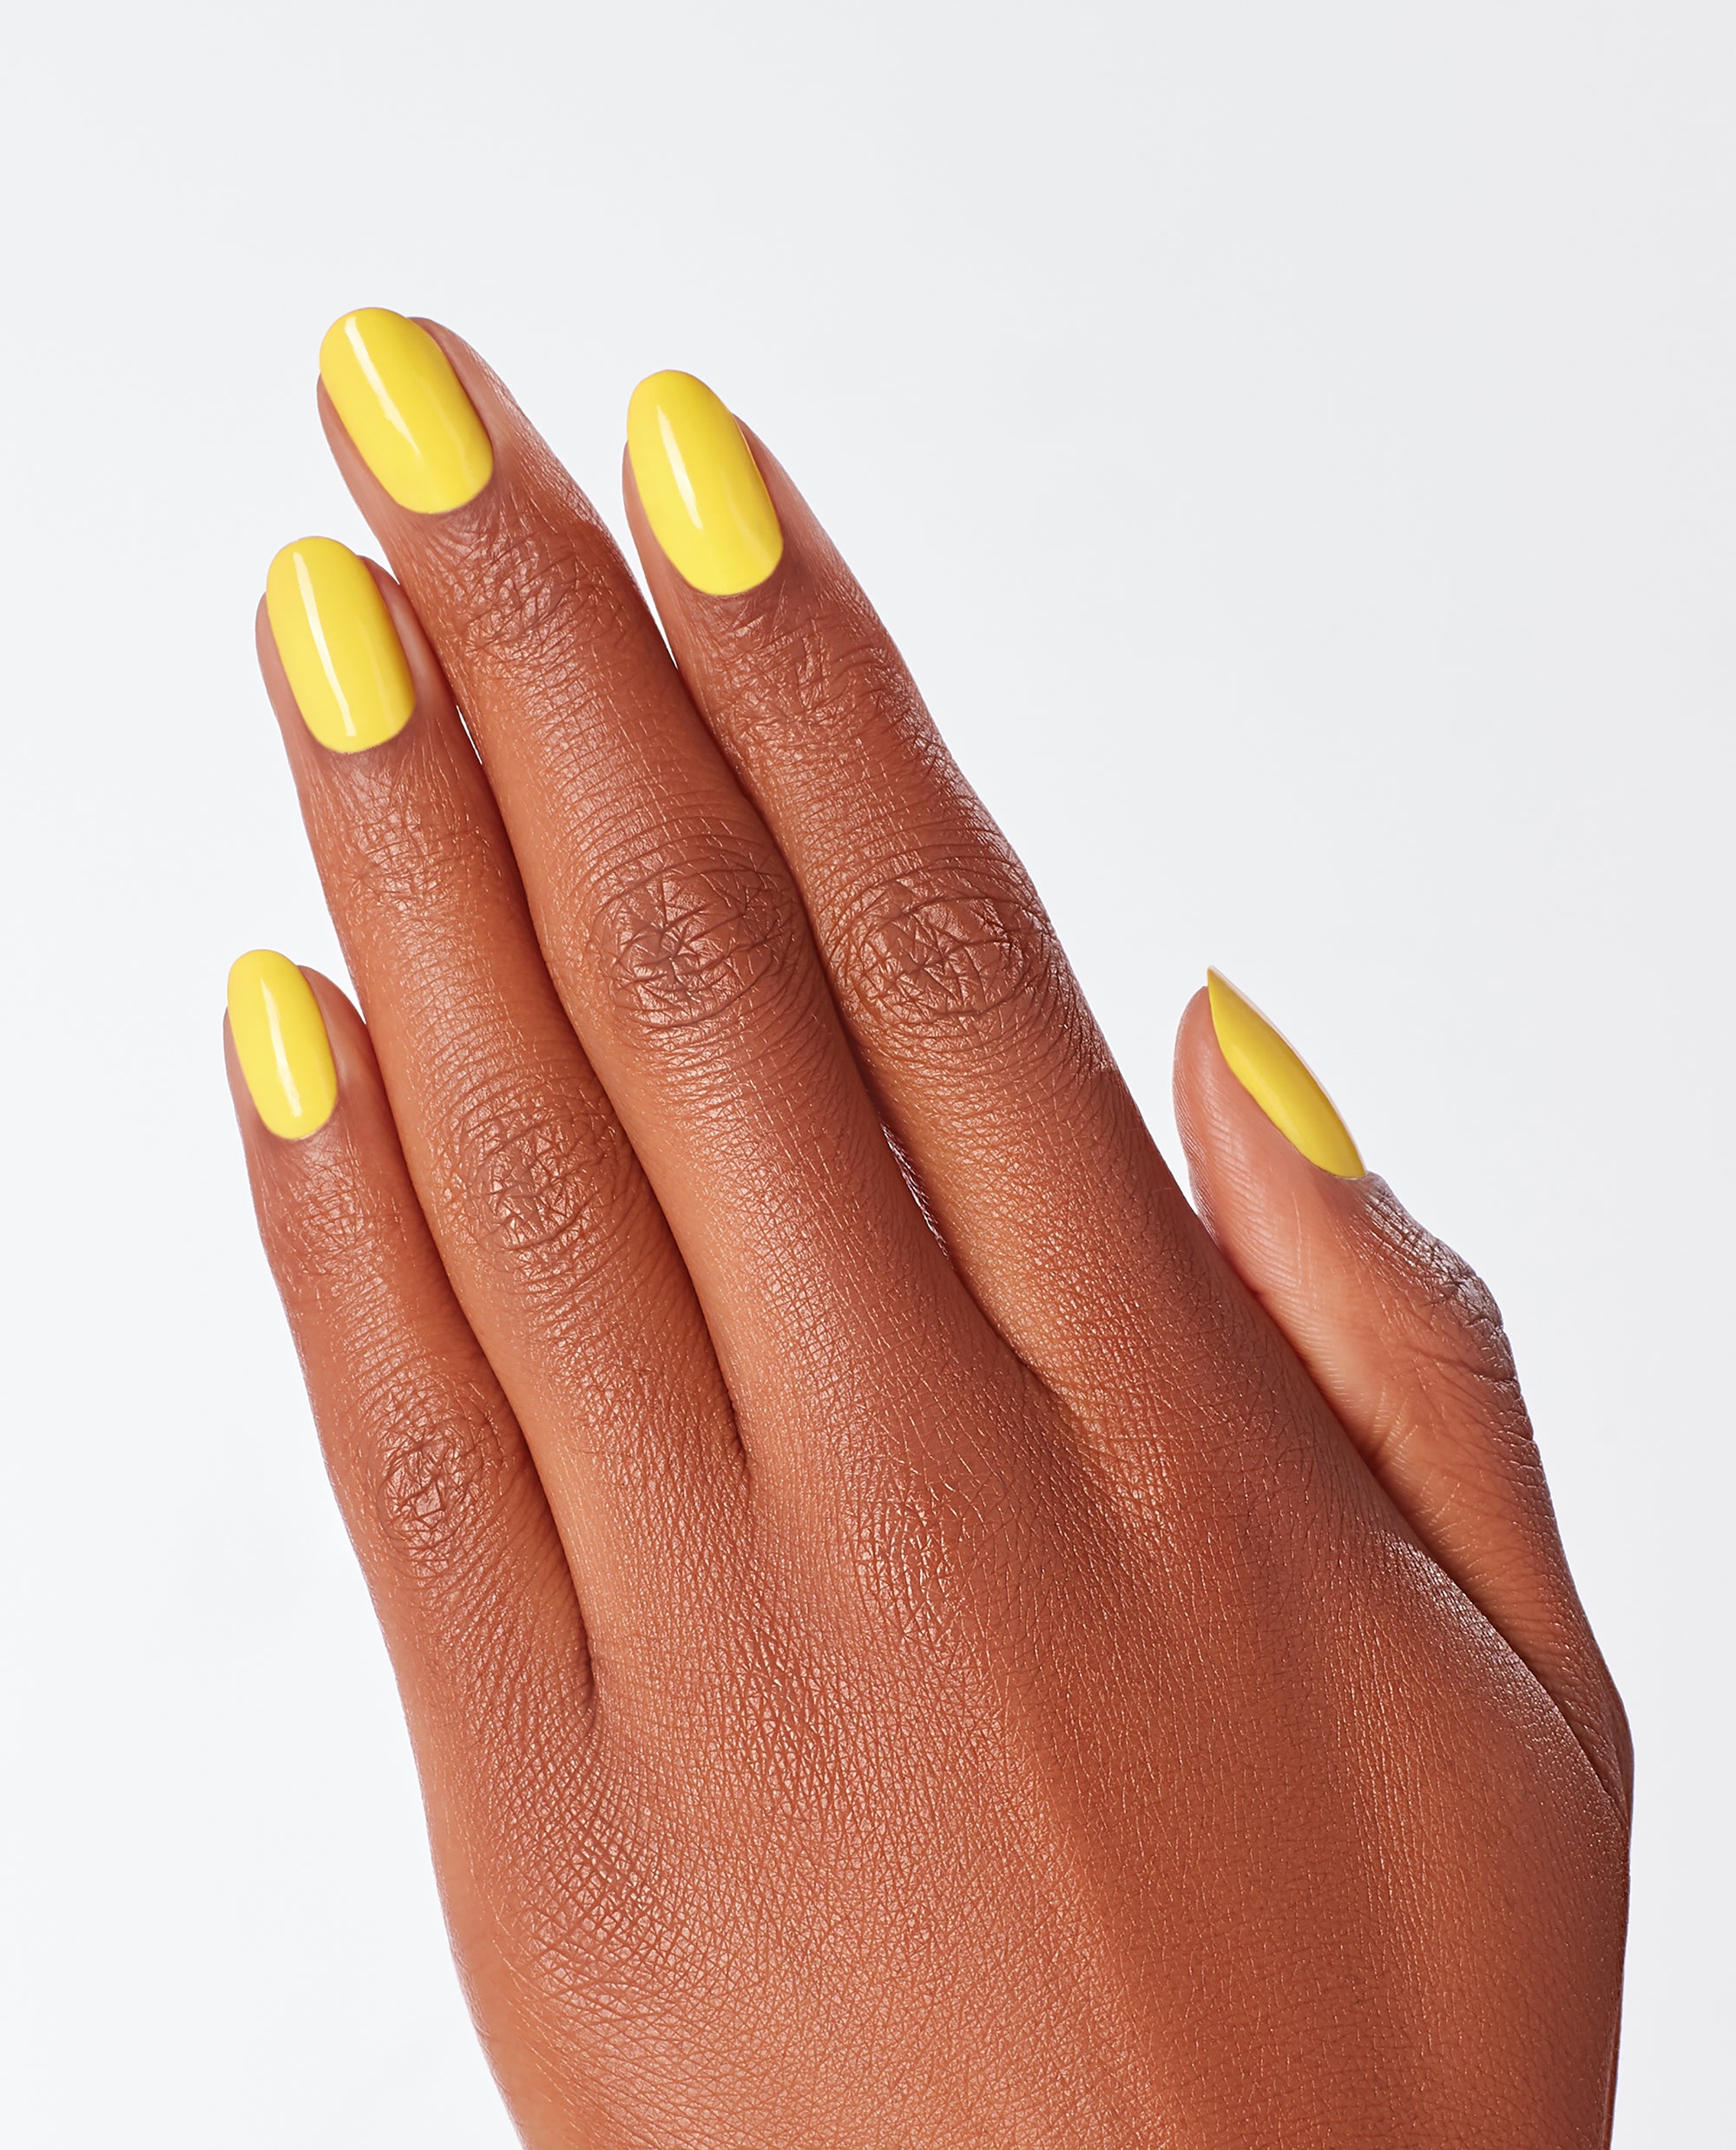 Bright Manicure Design of Yellow Nails Stock Photo - Image of finger, body:  98081270